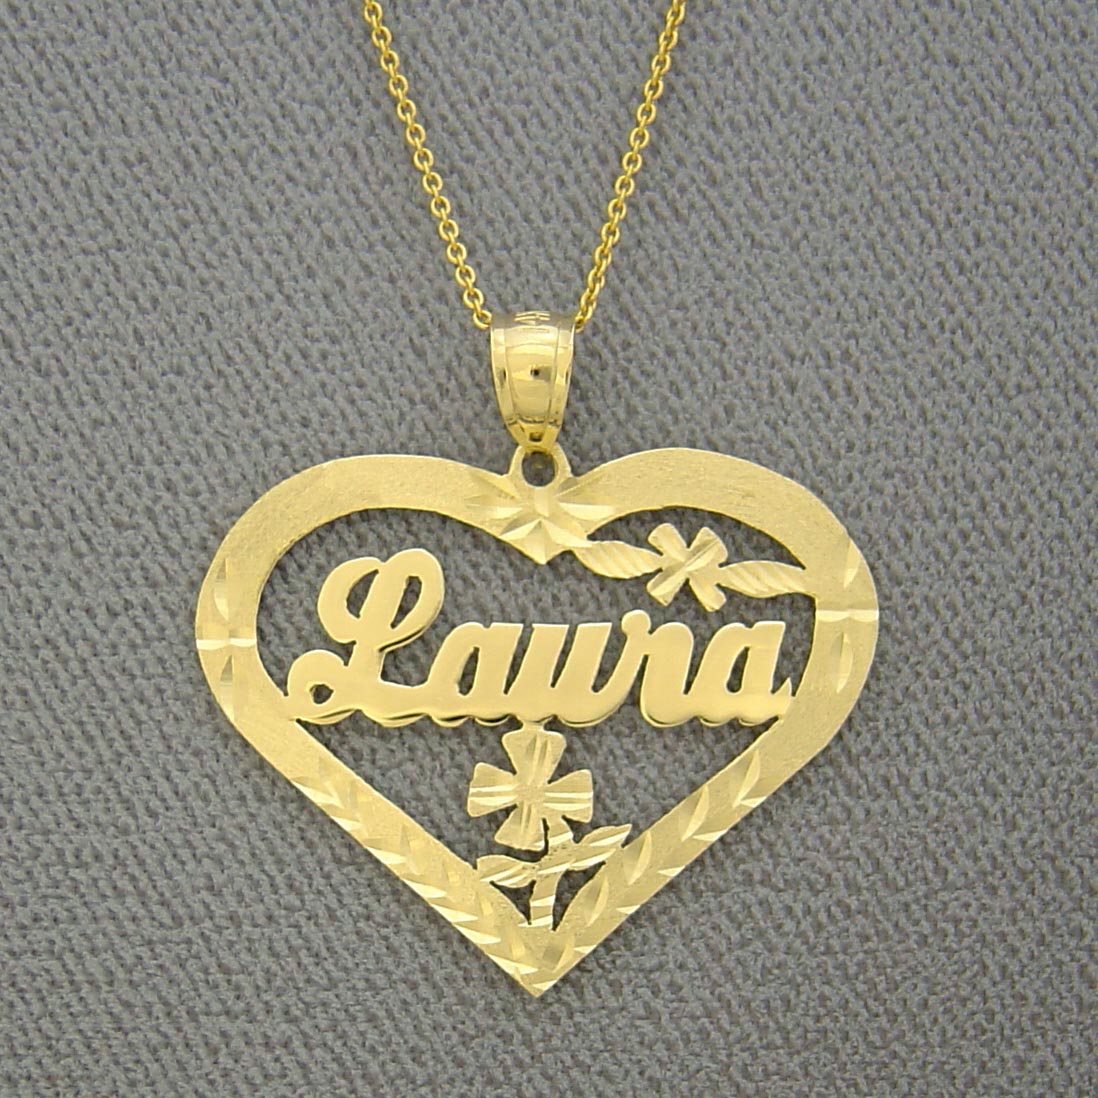 10k or 14k Solid Gold Personalized Name Heart Pendant Diamond Cut Flower Fine Jewelry Charm NP41